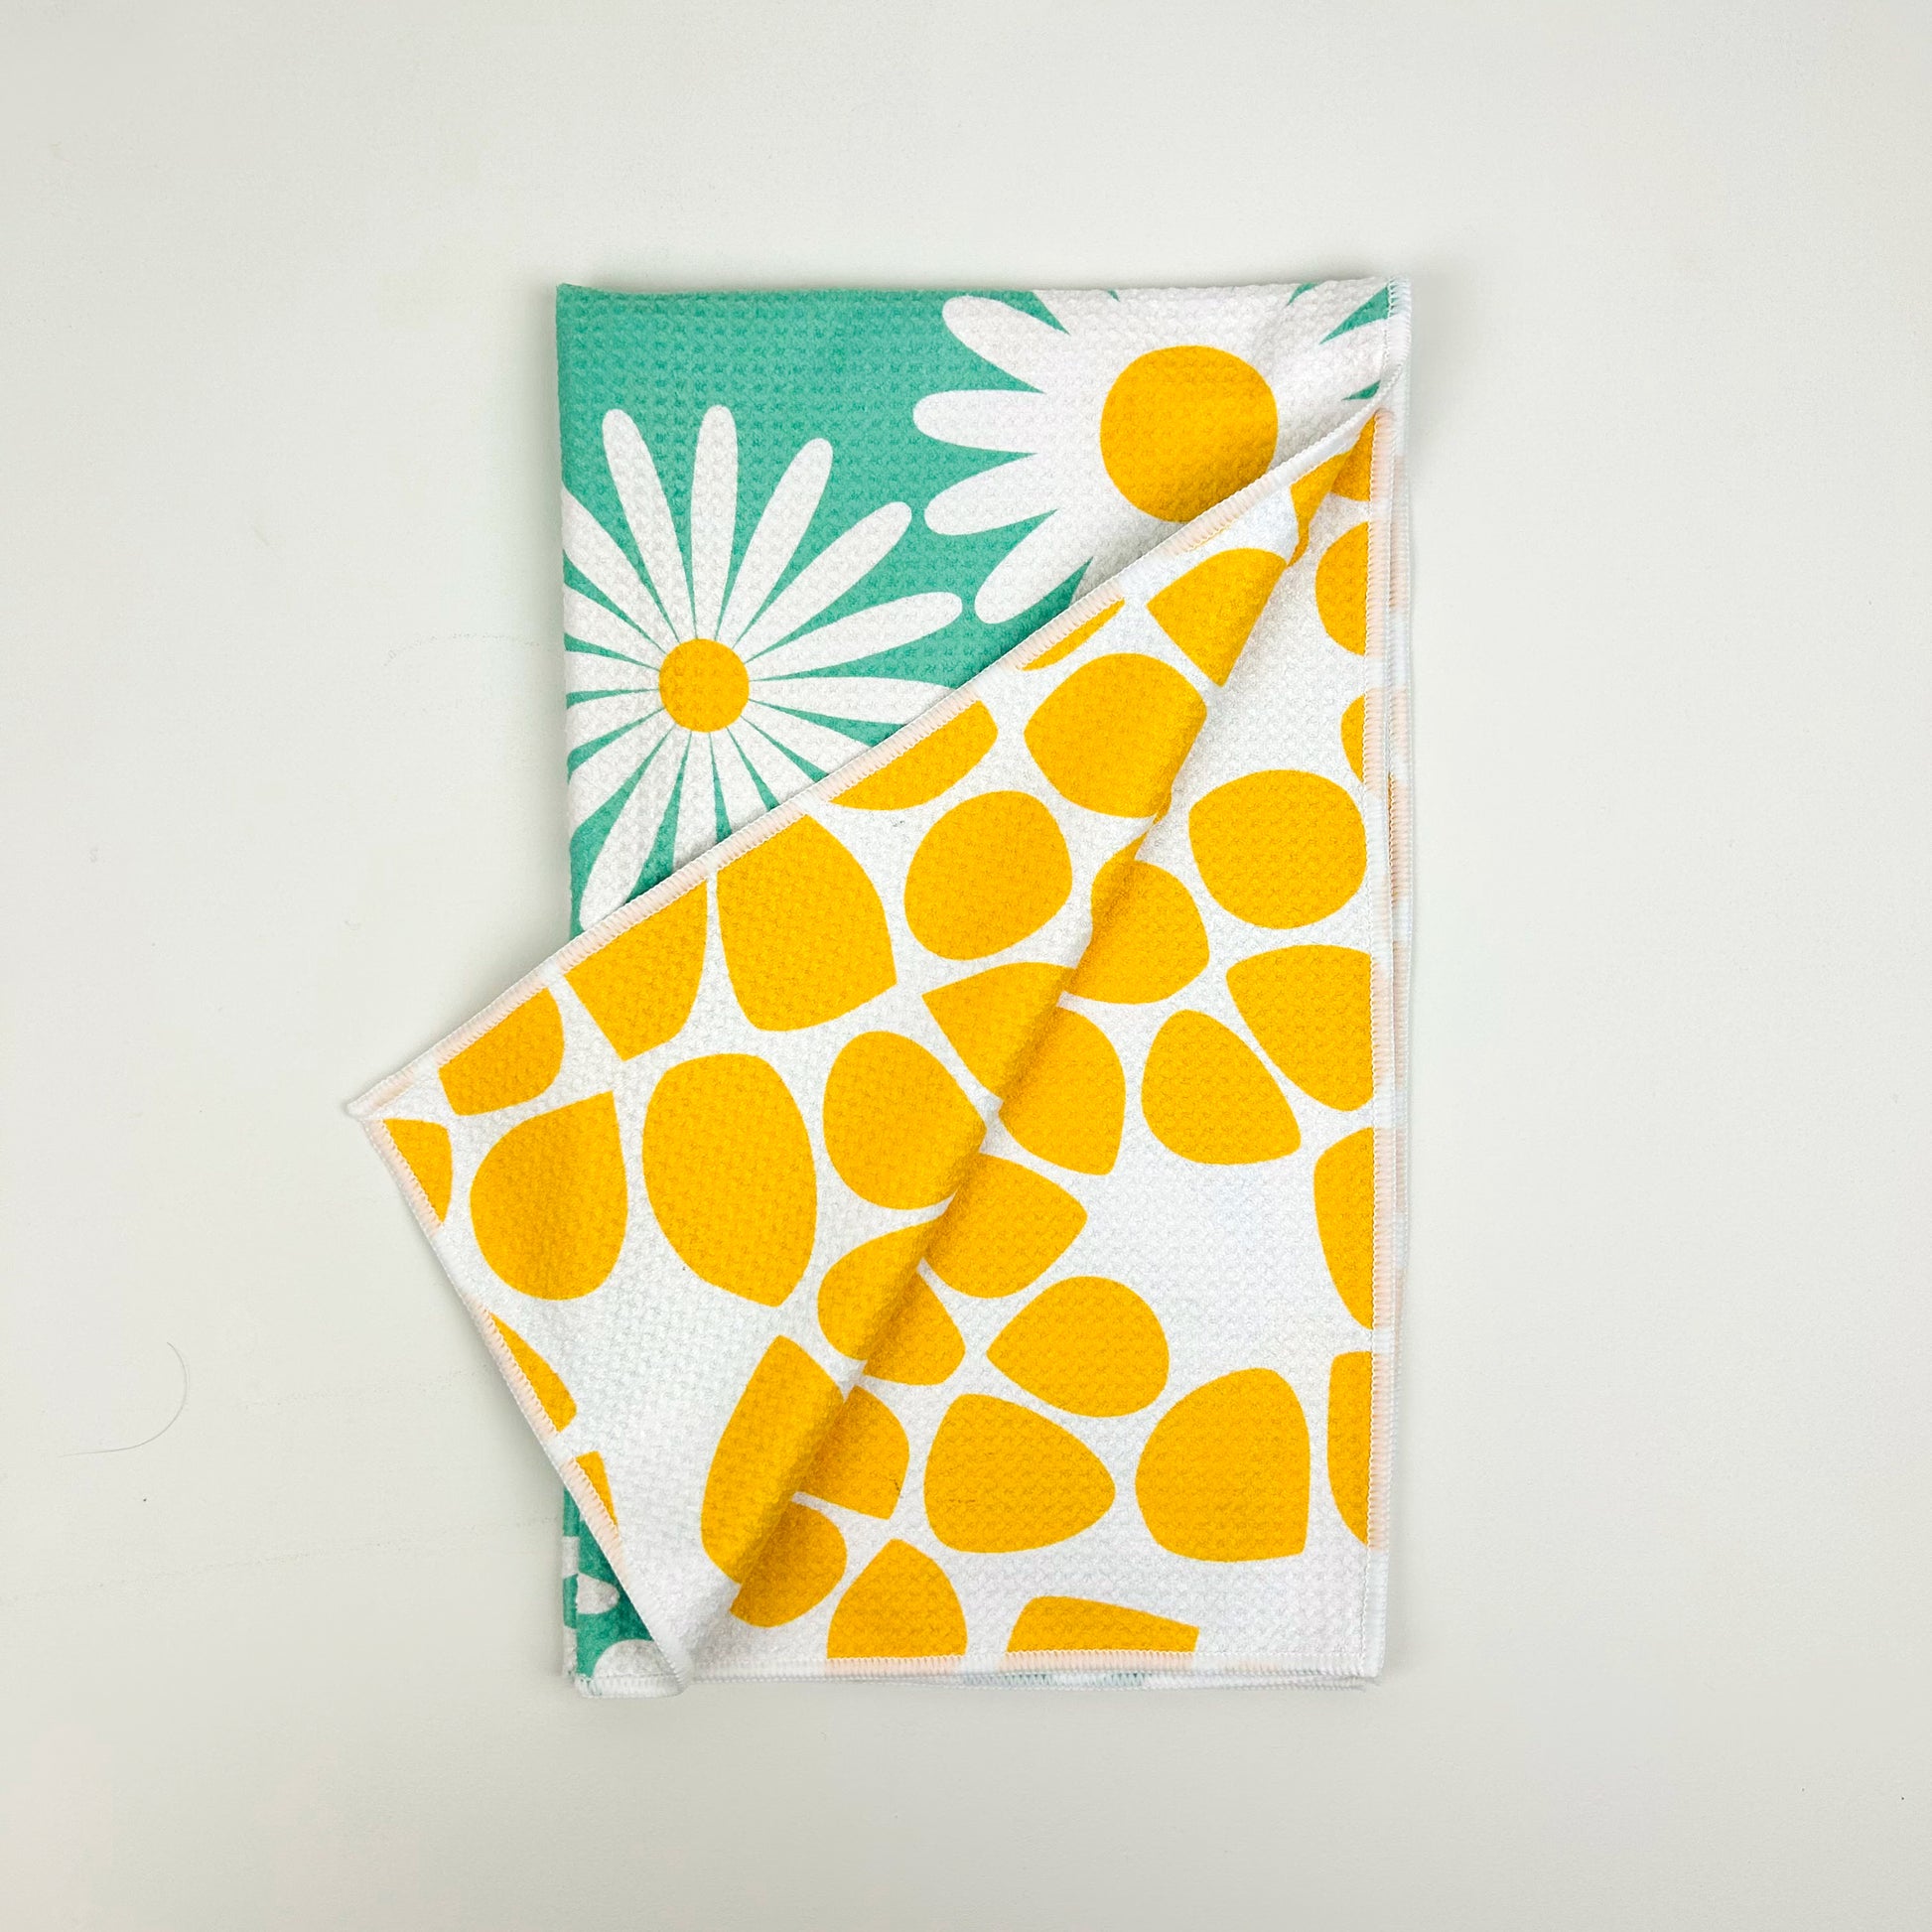 QODUNG Farmhouse Yellow Daisy Flowers and Honey Bee Soft Kitchen Towels  Dishcloths 16x24 Inch Set of 2,Summer Spring Gifts Drying Cloth Hand Towels